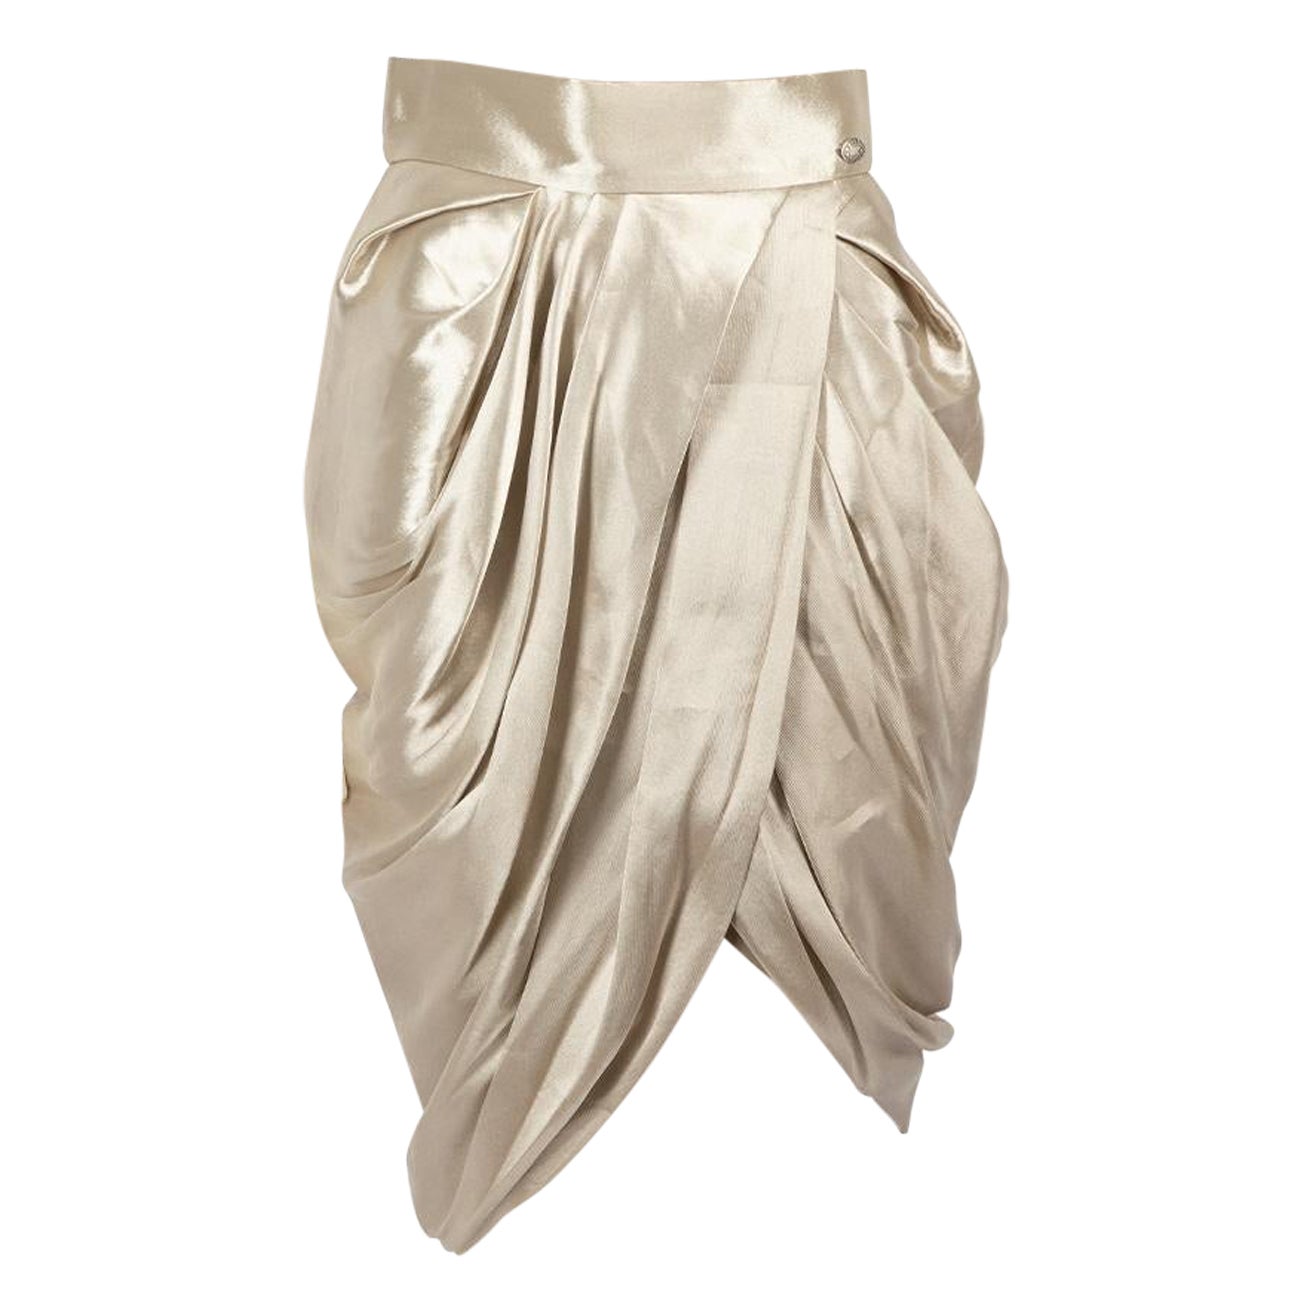 Chanel Beige Metallic Ruched Skirt Size M For Sale